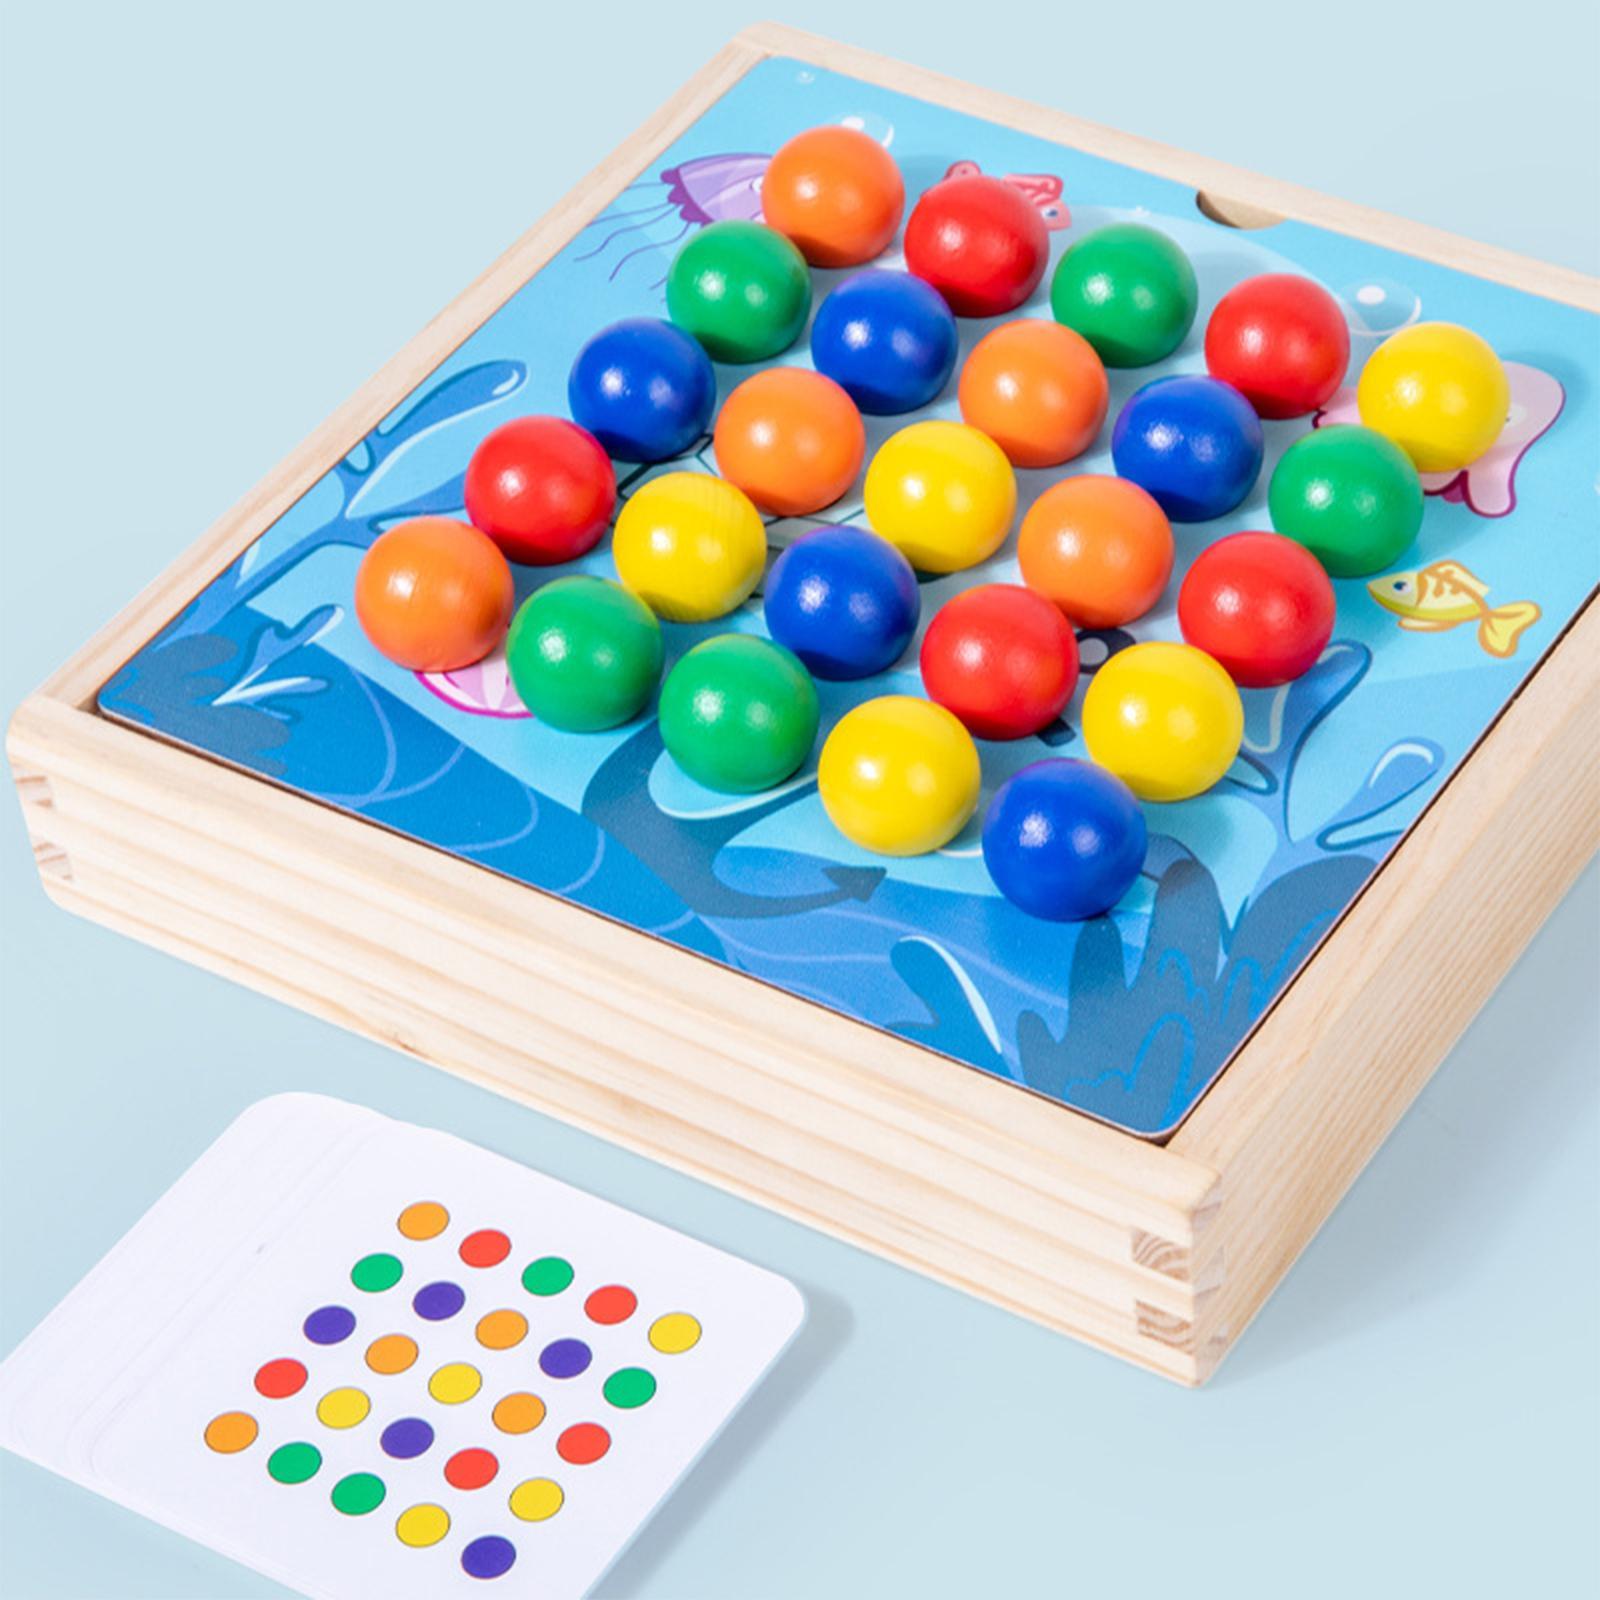 Wooden Puzzle Sorting Stacking color Sorting Matching Fine Motor Skill Learning Toy Clip Beads Game for Role Play Activity Indoor Gift